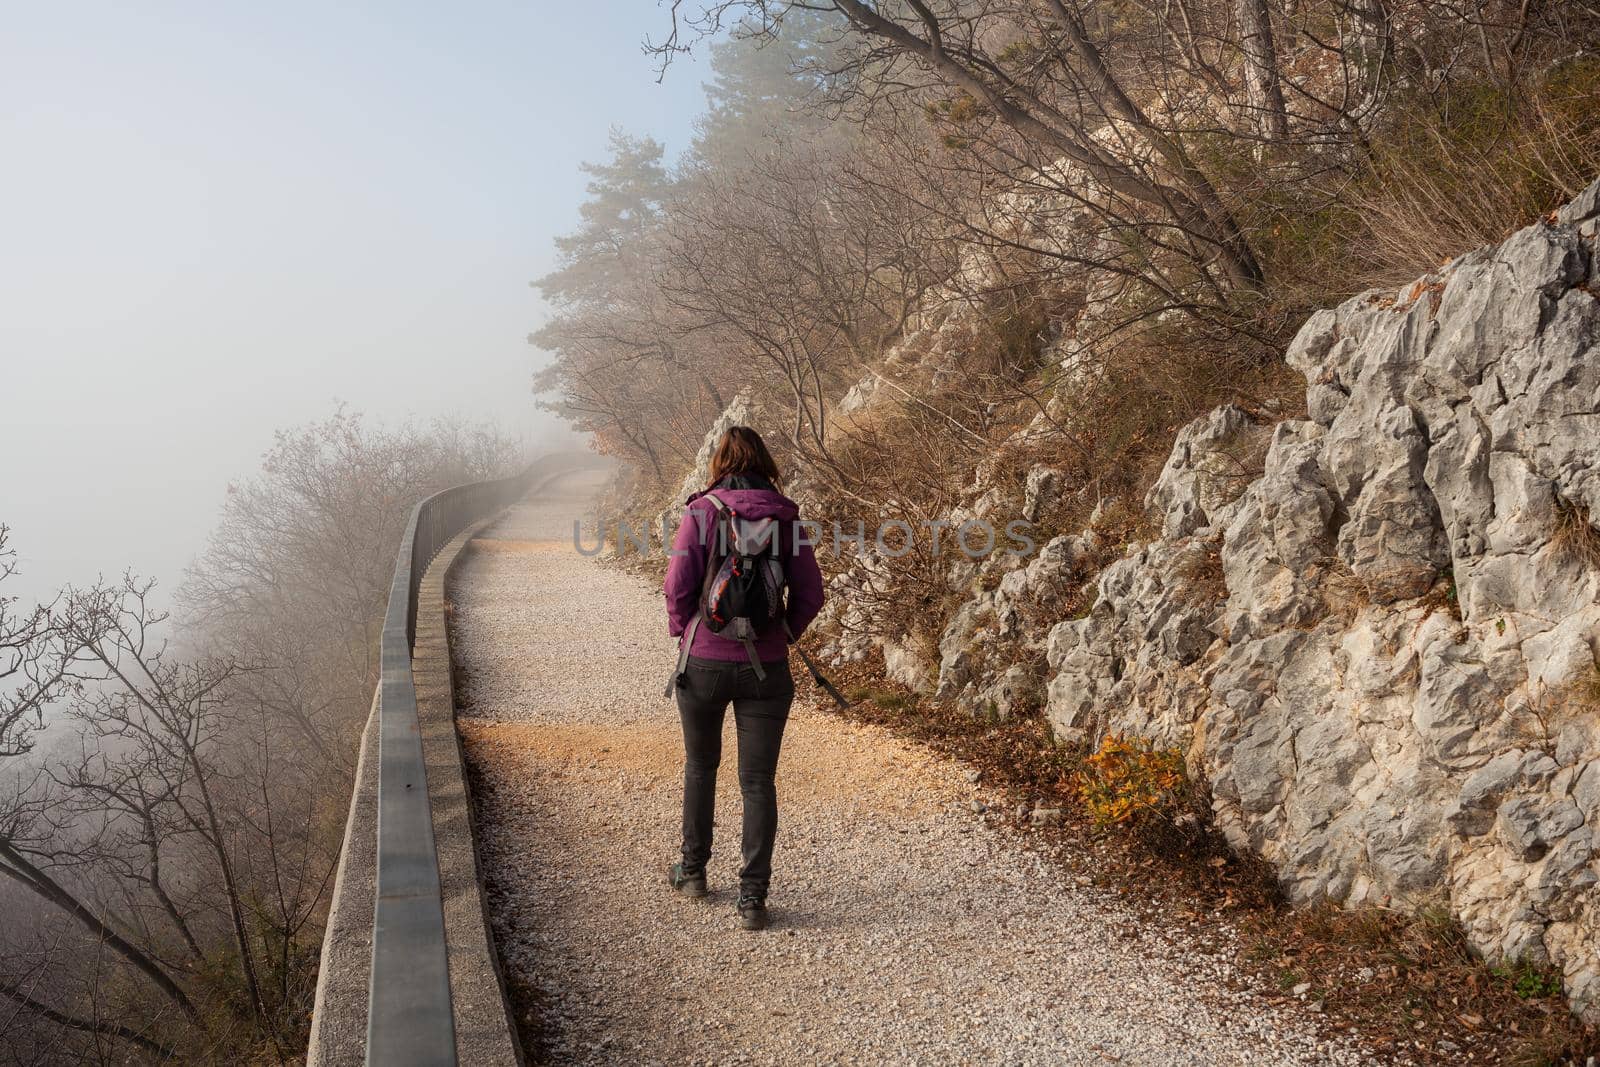 Back view of a Woman walking alone on rural misty path called Napoleonica, Trieste